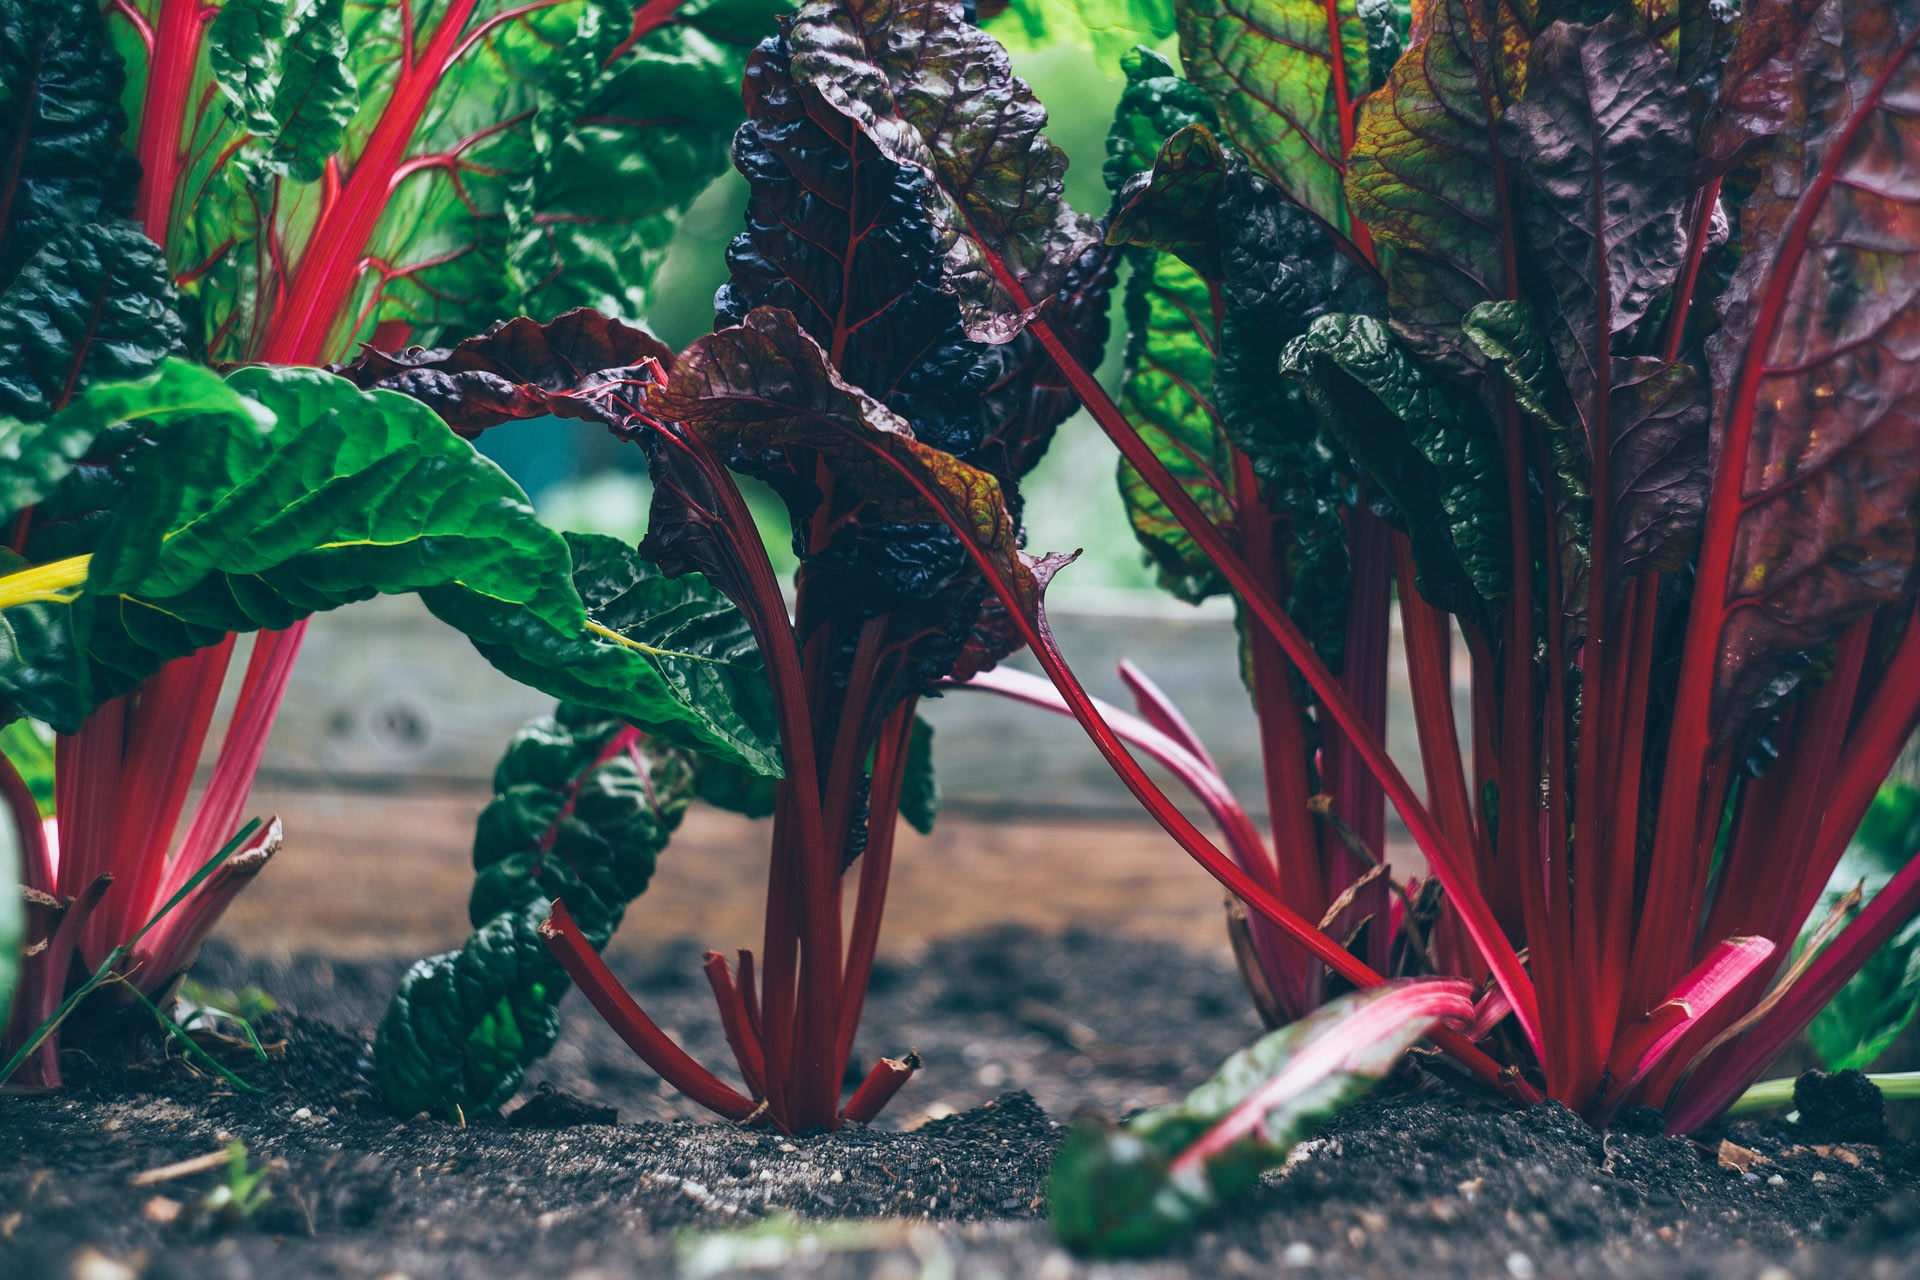 Edible Beet Greens growing out of the soil